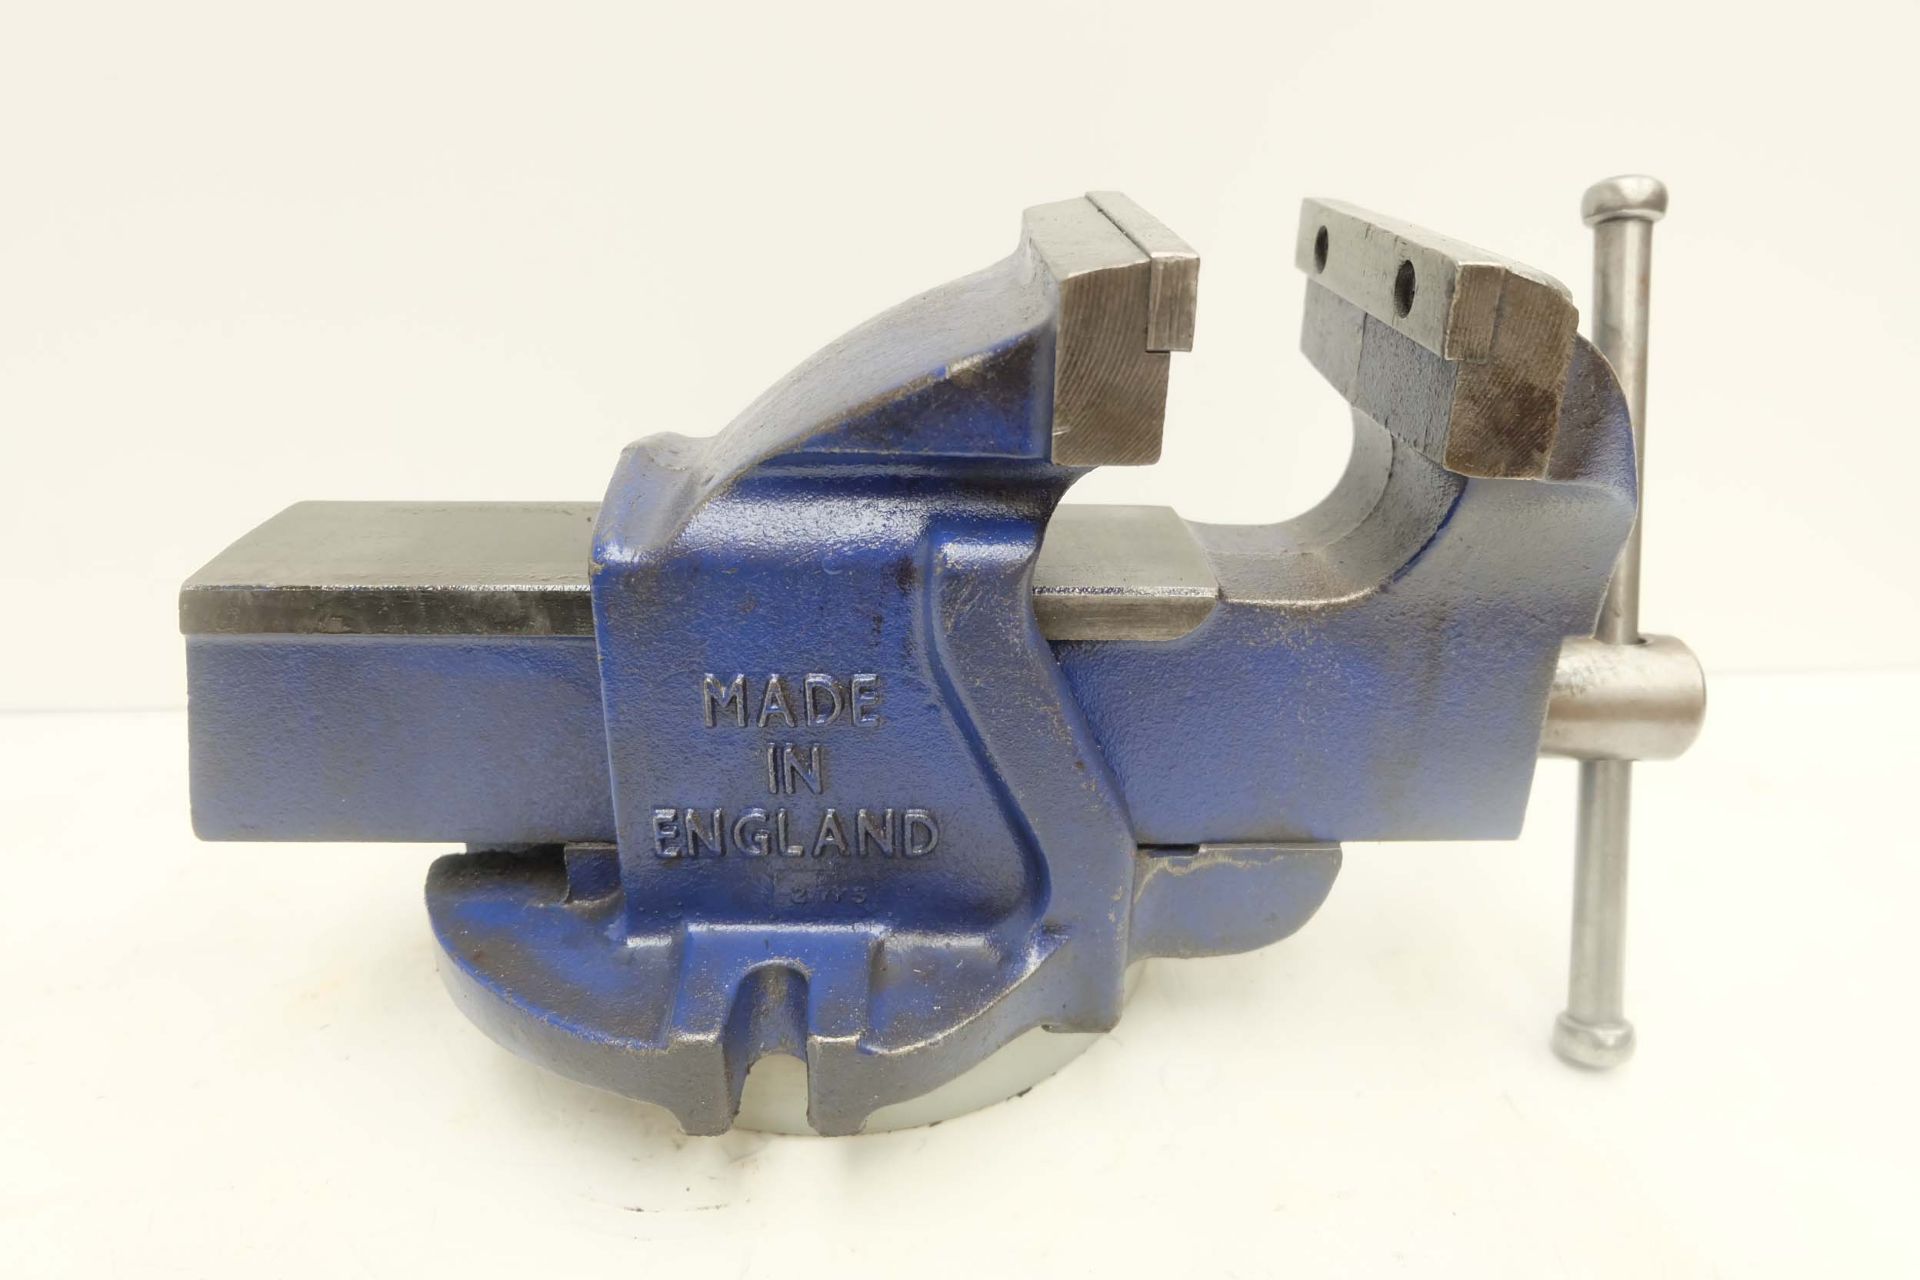 Record No.4 Bench Vice Width of Jaws 4 1/2" Max Opening 5 3/4". - Image 4 of 5